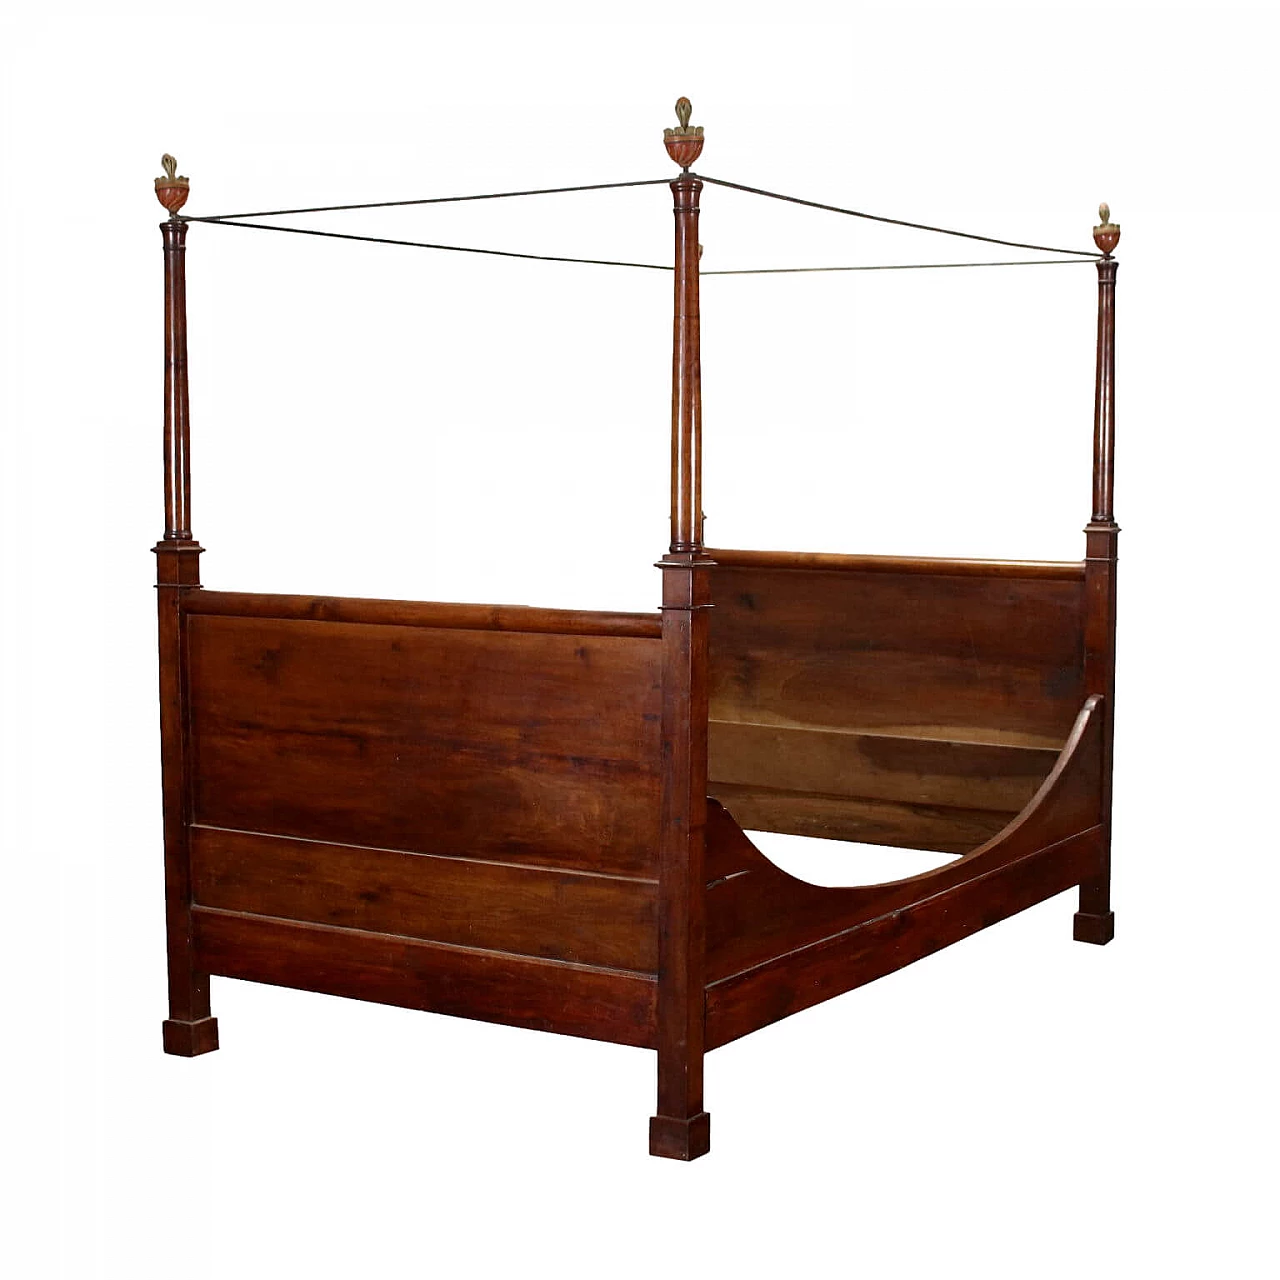 Piedmontese Empire bed in wood and wrought iron, 19th century 1466780